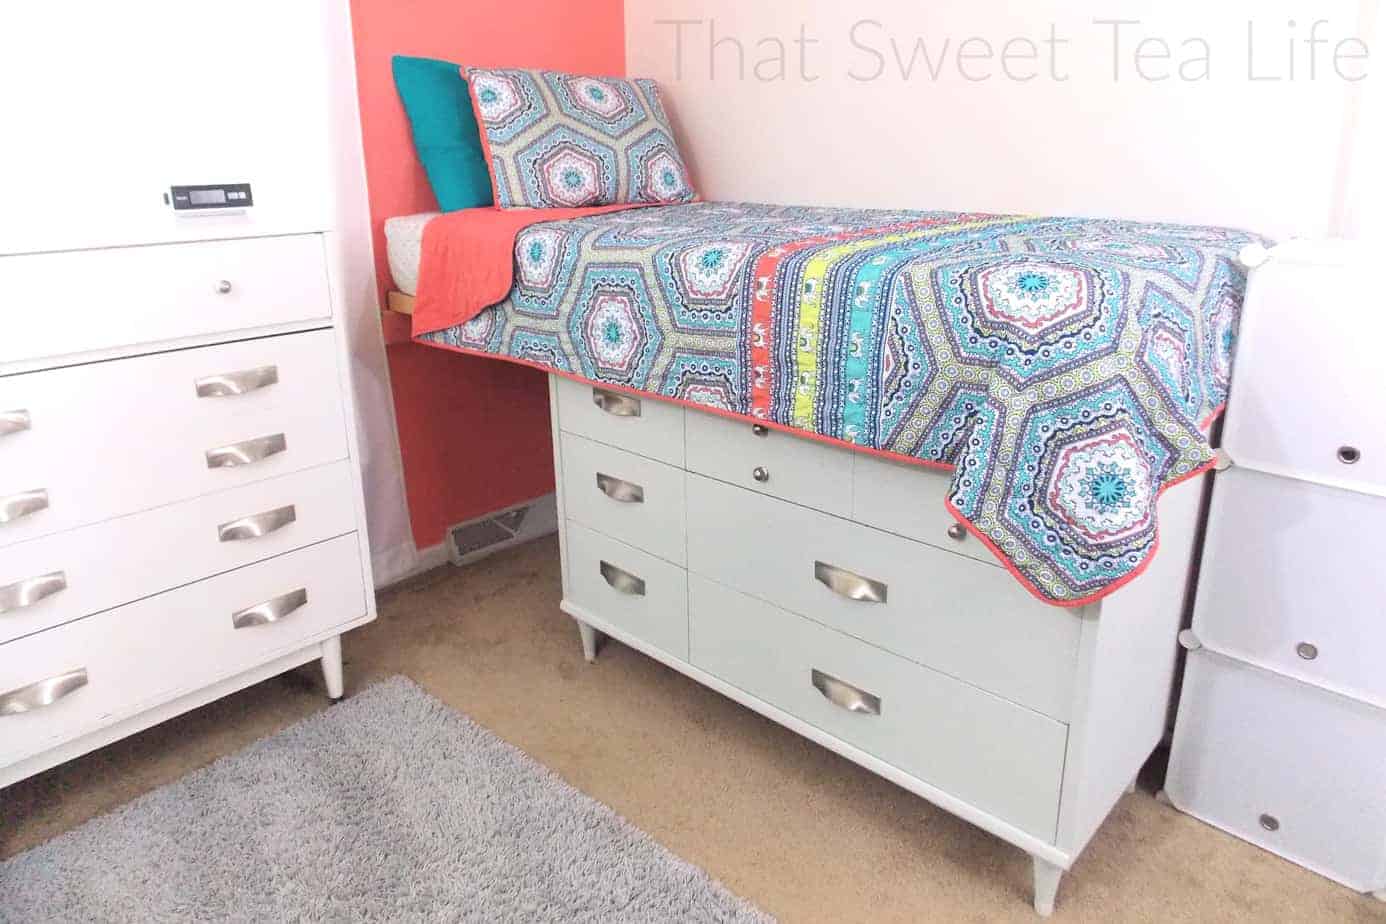 How To Make Beds With Storage, Twin Bed With Drawers Under